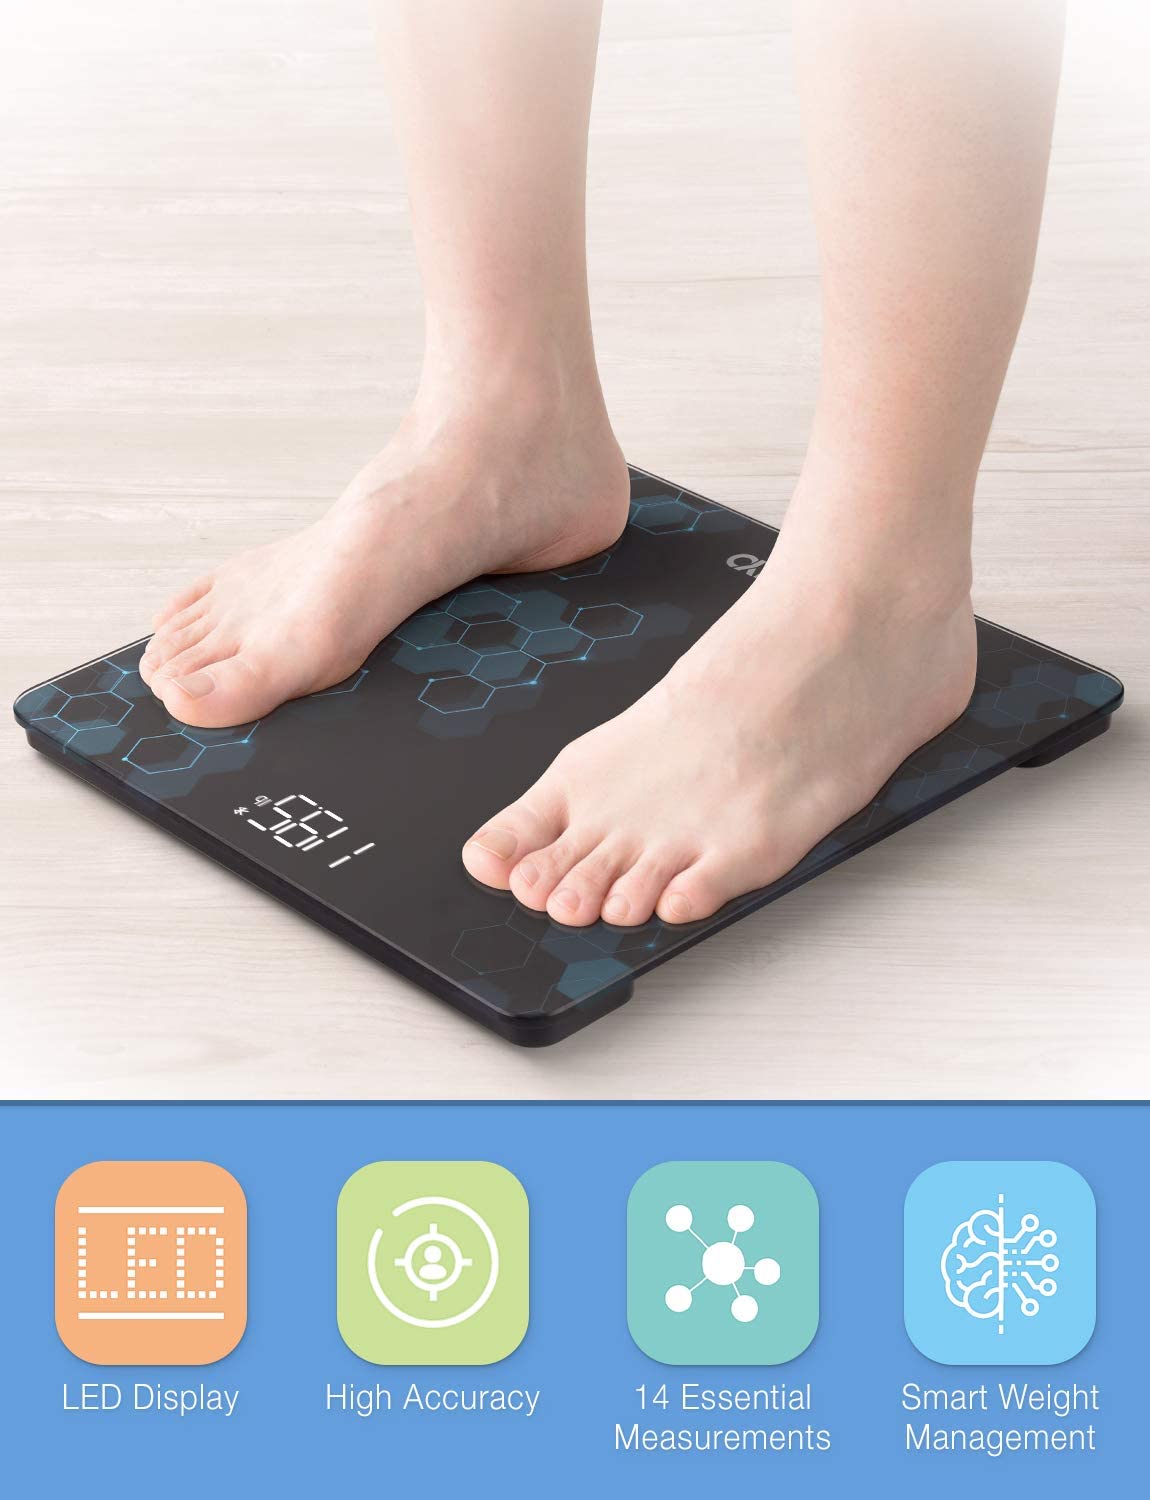 Smart Body Fat Scale with 12 Body Composition Analyzer - Digital Bathroom  Scale for Accurate Weight and Fat Measurement up to 400lbs - Syncs with Apps